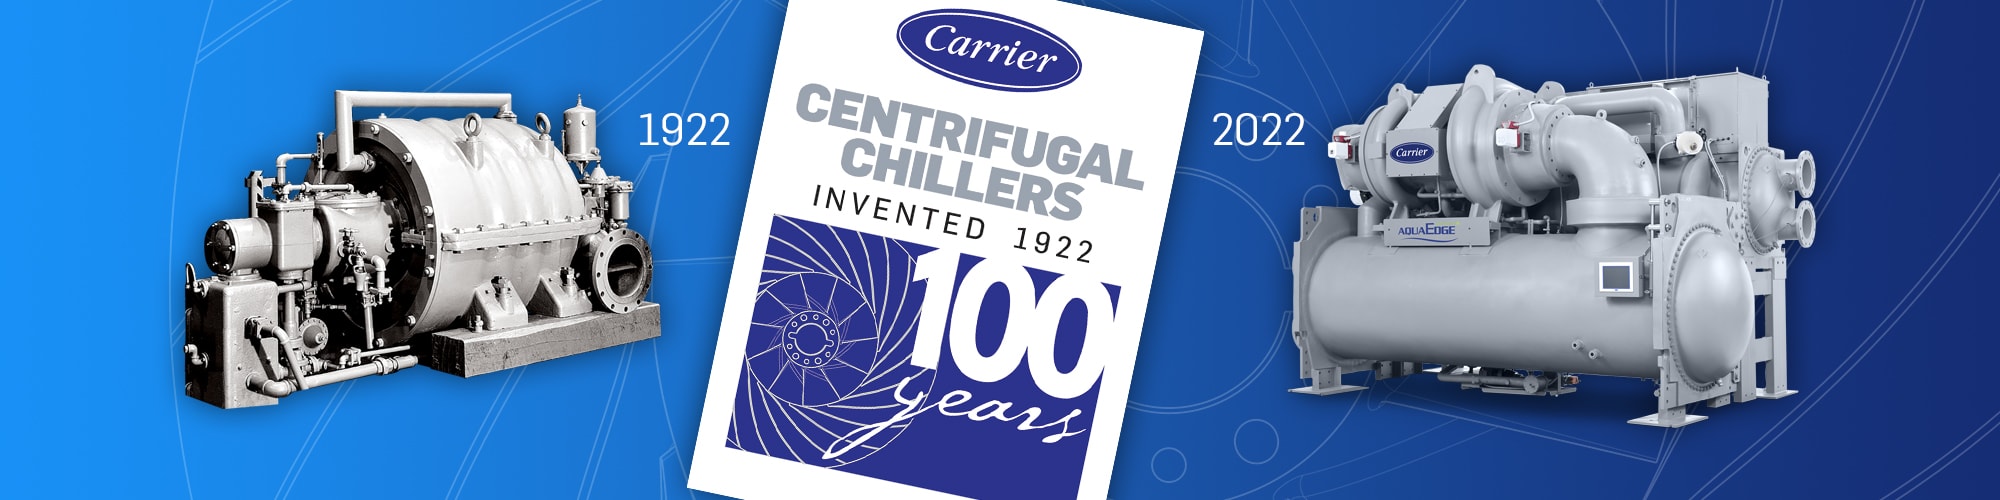 100-year-anniversary-centrifugal-chillers